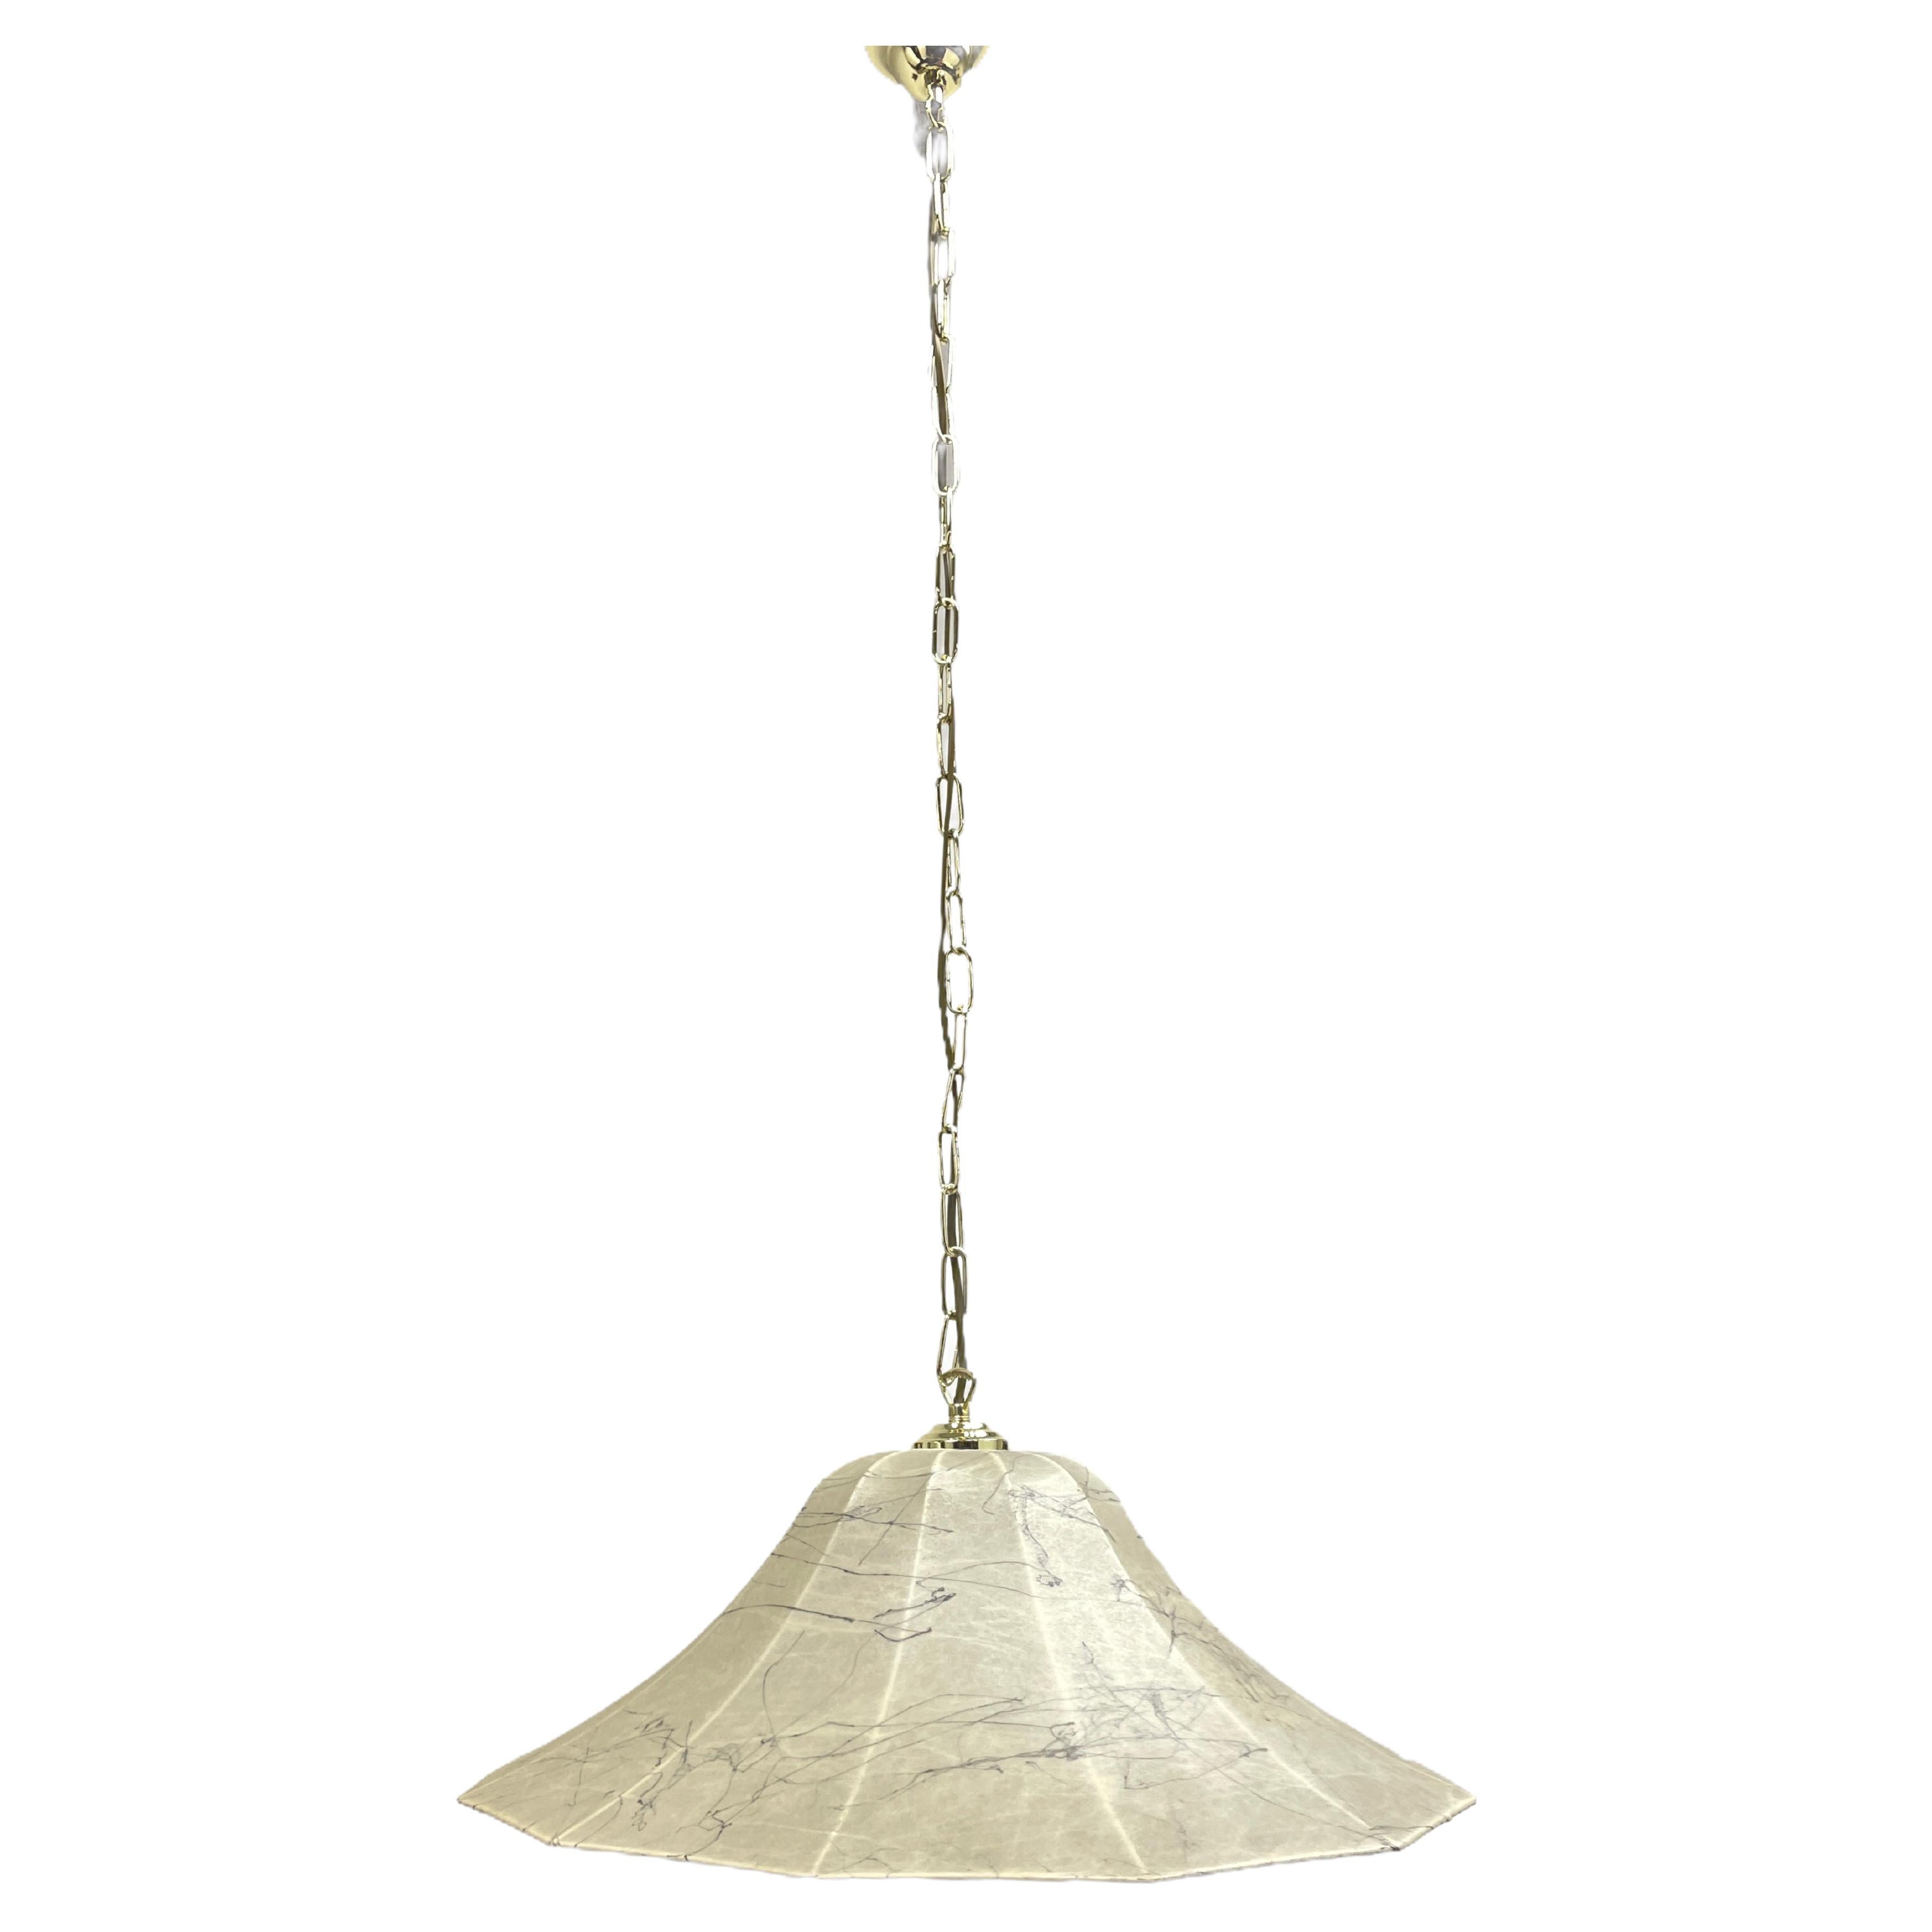 Cocoon Ceiling Pendant Light by Goldkant, 1960s, Germany For Sale